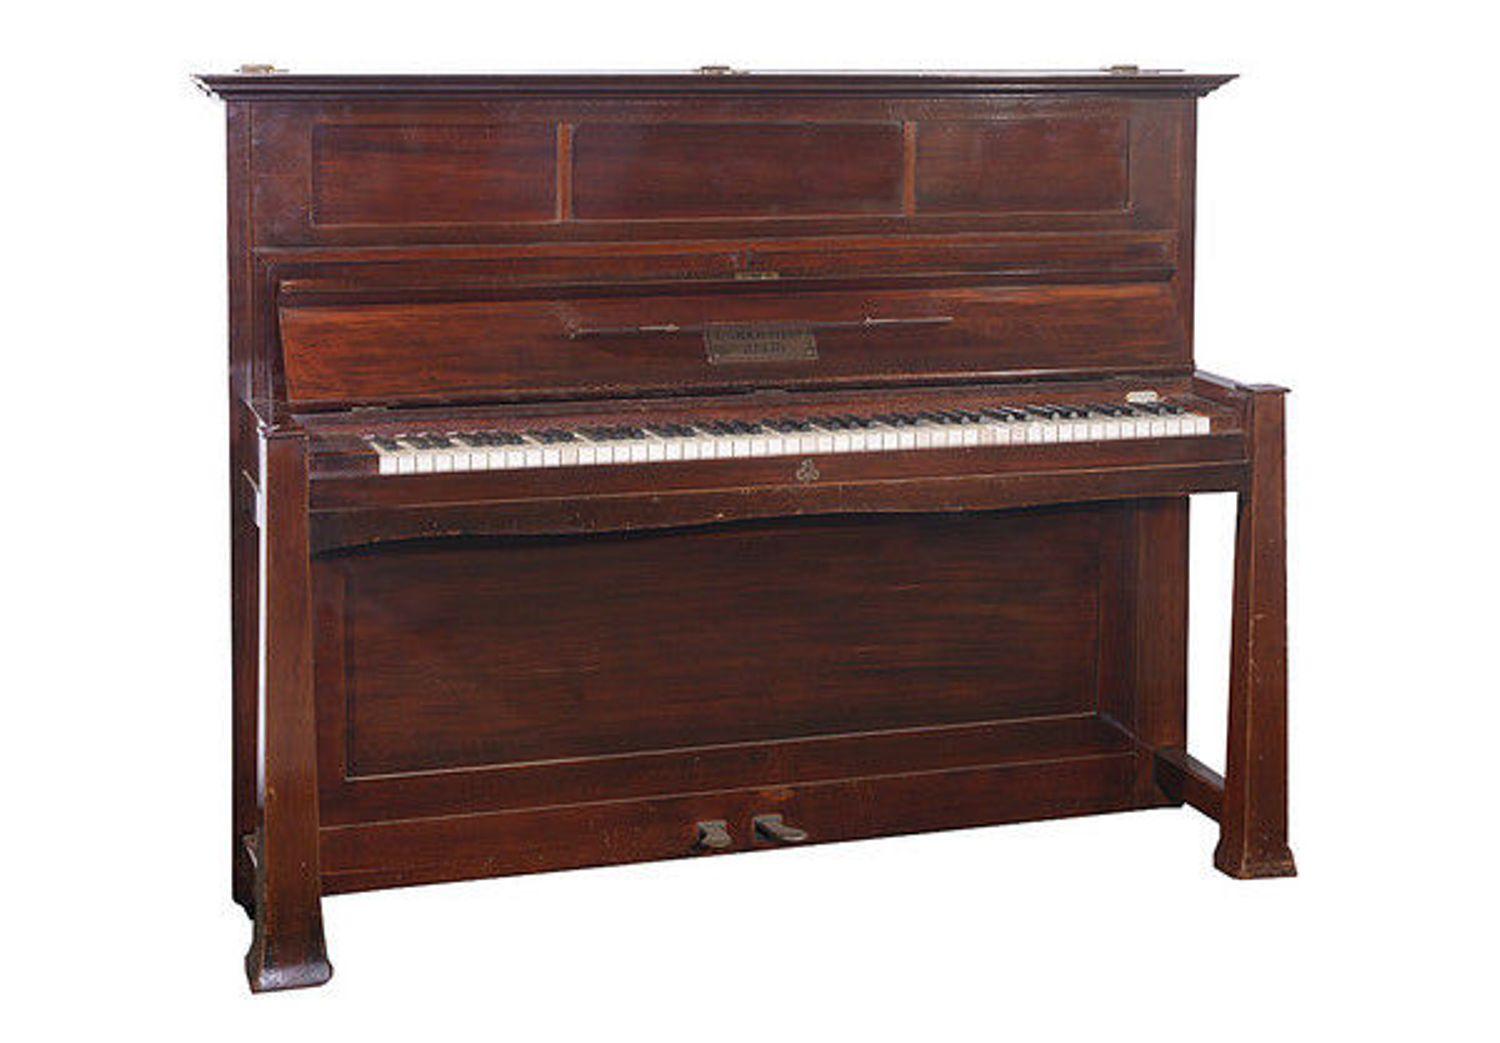 Early 20th Century Upright Piano Manufactured by C. Bechstein For Sale 1